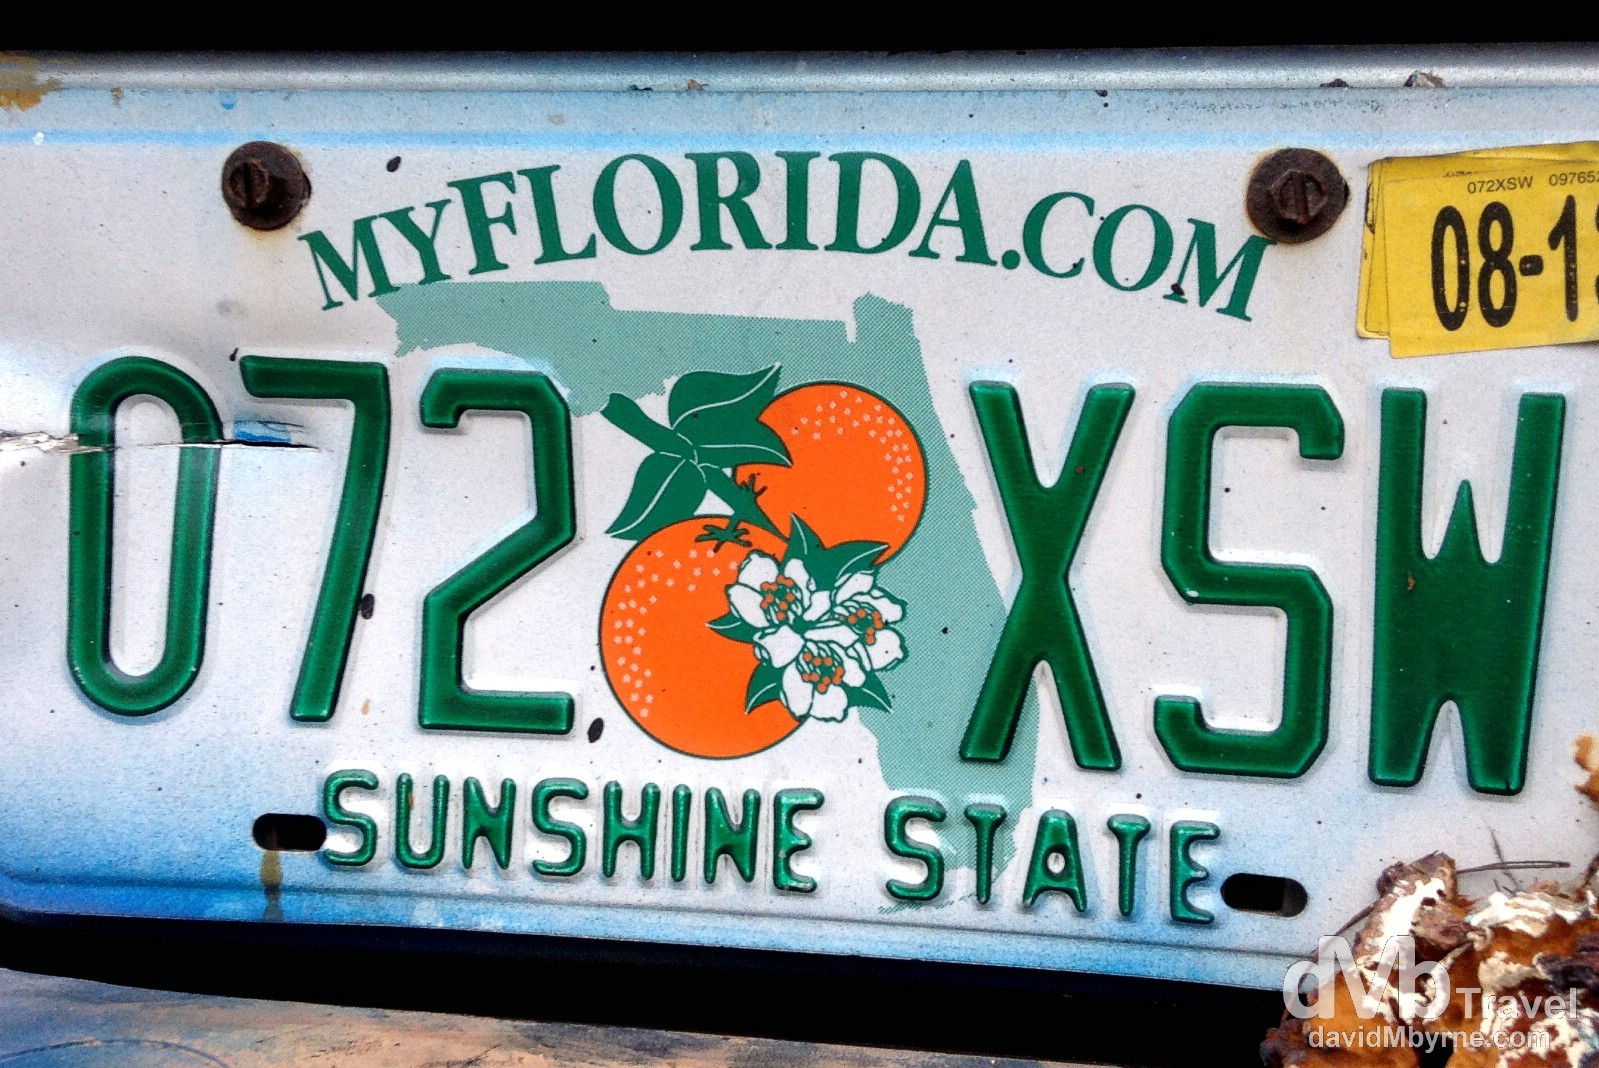 A licence plate on the streets of Key West, Florida, USA. July 3rd 2013. (iPod)